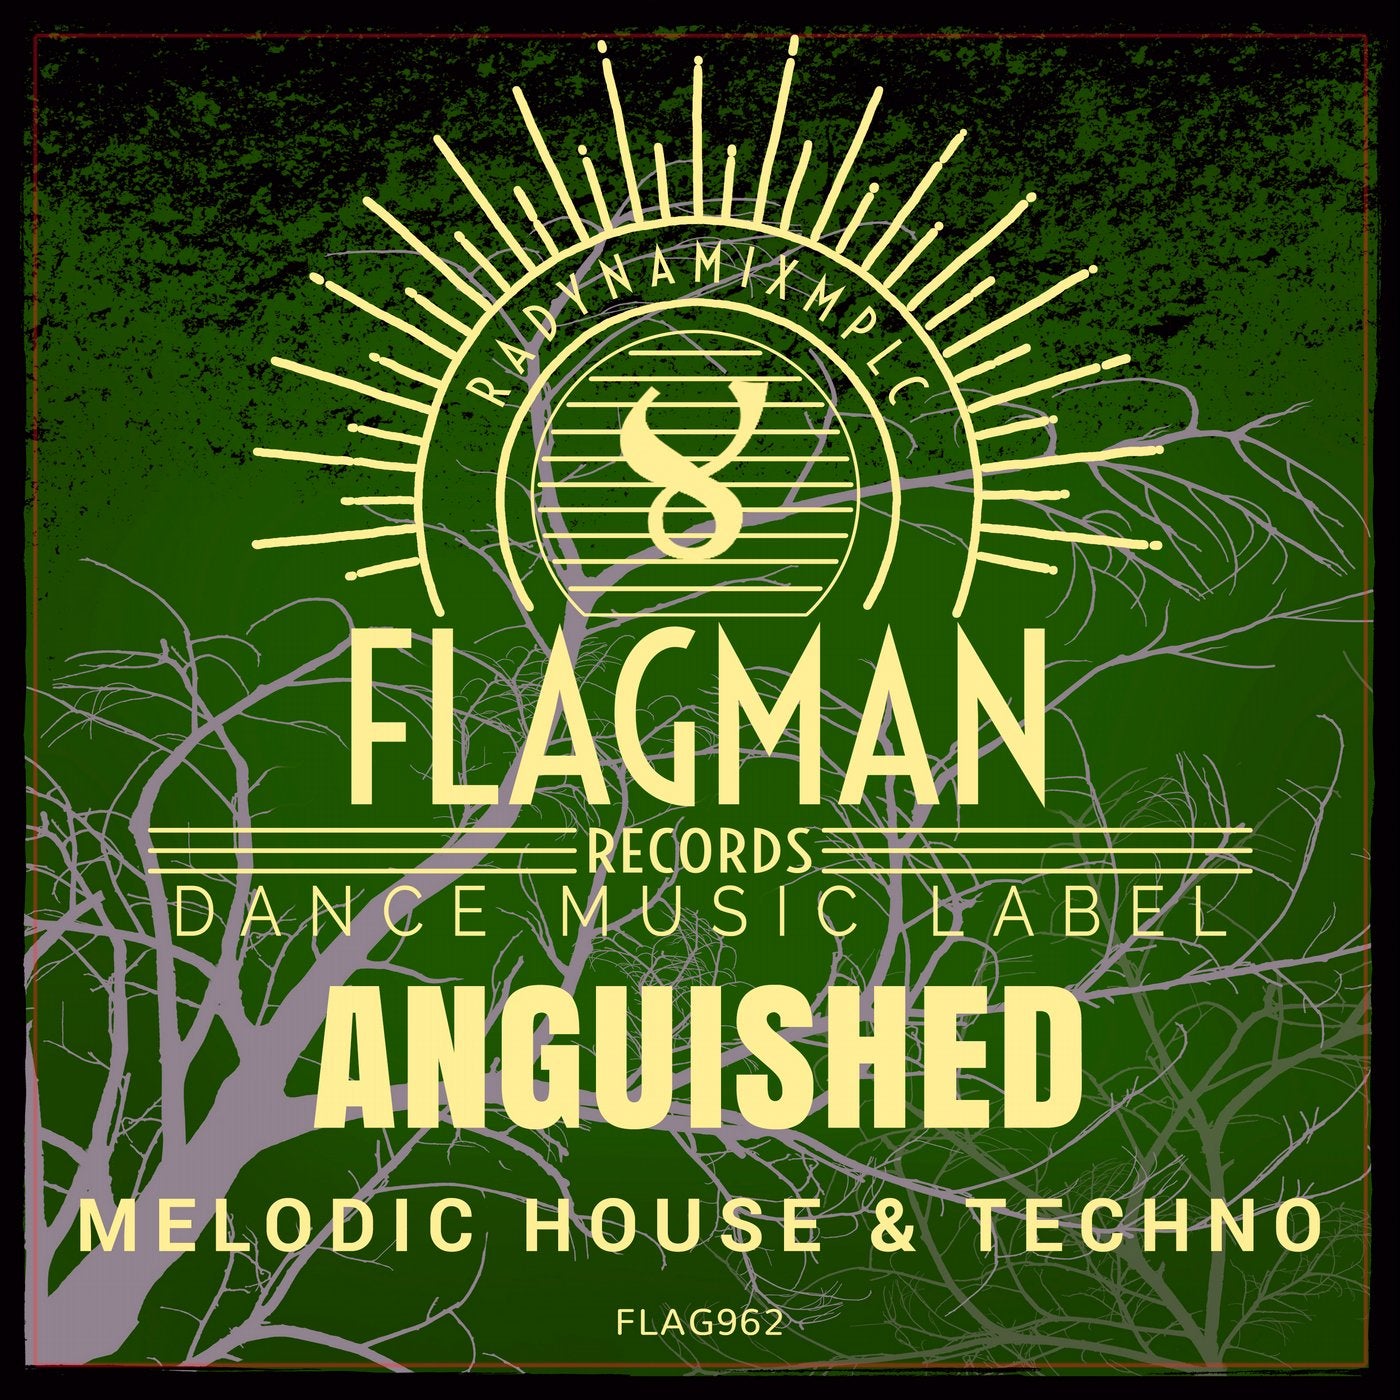 Anguished Melodic House & Techno